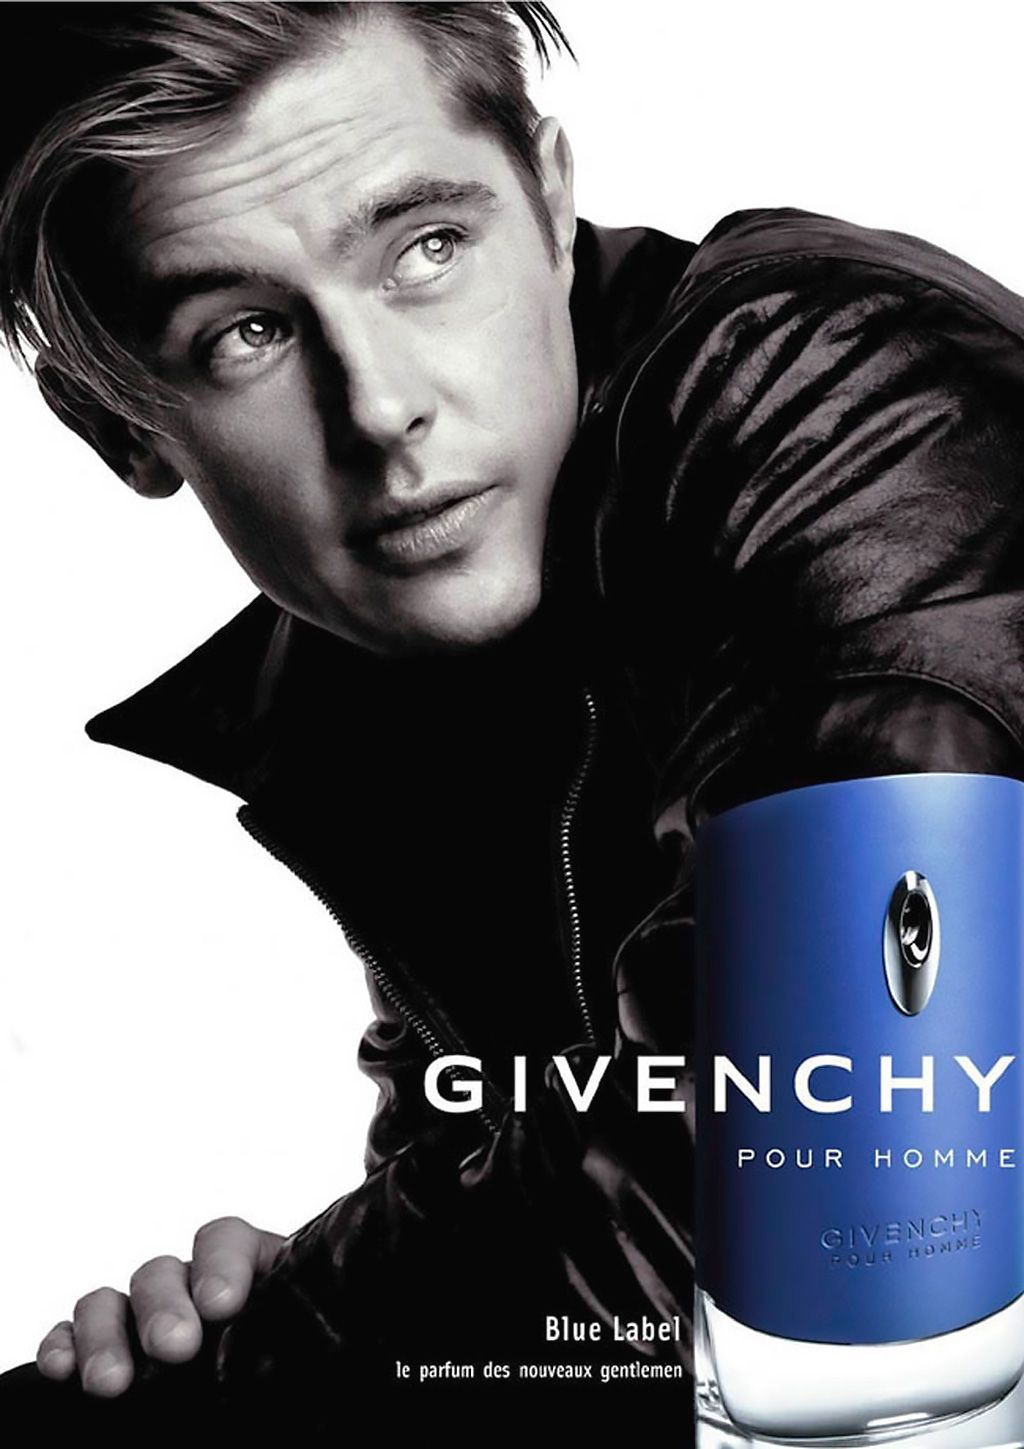 Pour homme для мужчин. Givenchy pour homme Blue Label. Givenchy pour homme Blue Label 100ml. Мужские духи Givenchy "pour homme Blue Label" 100 ml. Givenchy pour homme Blue Label 100.